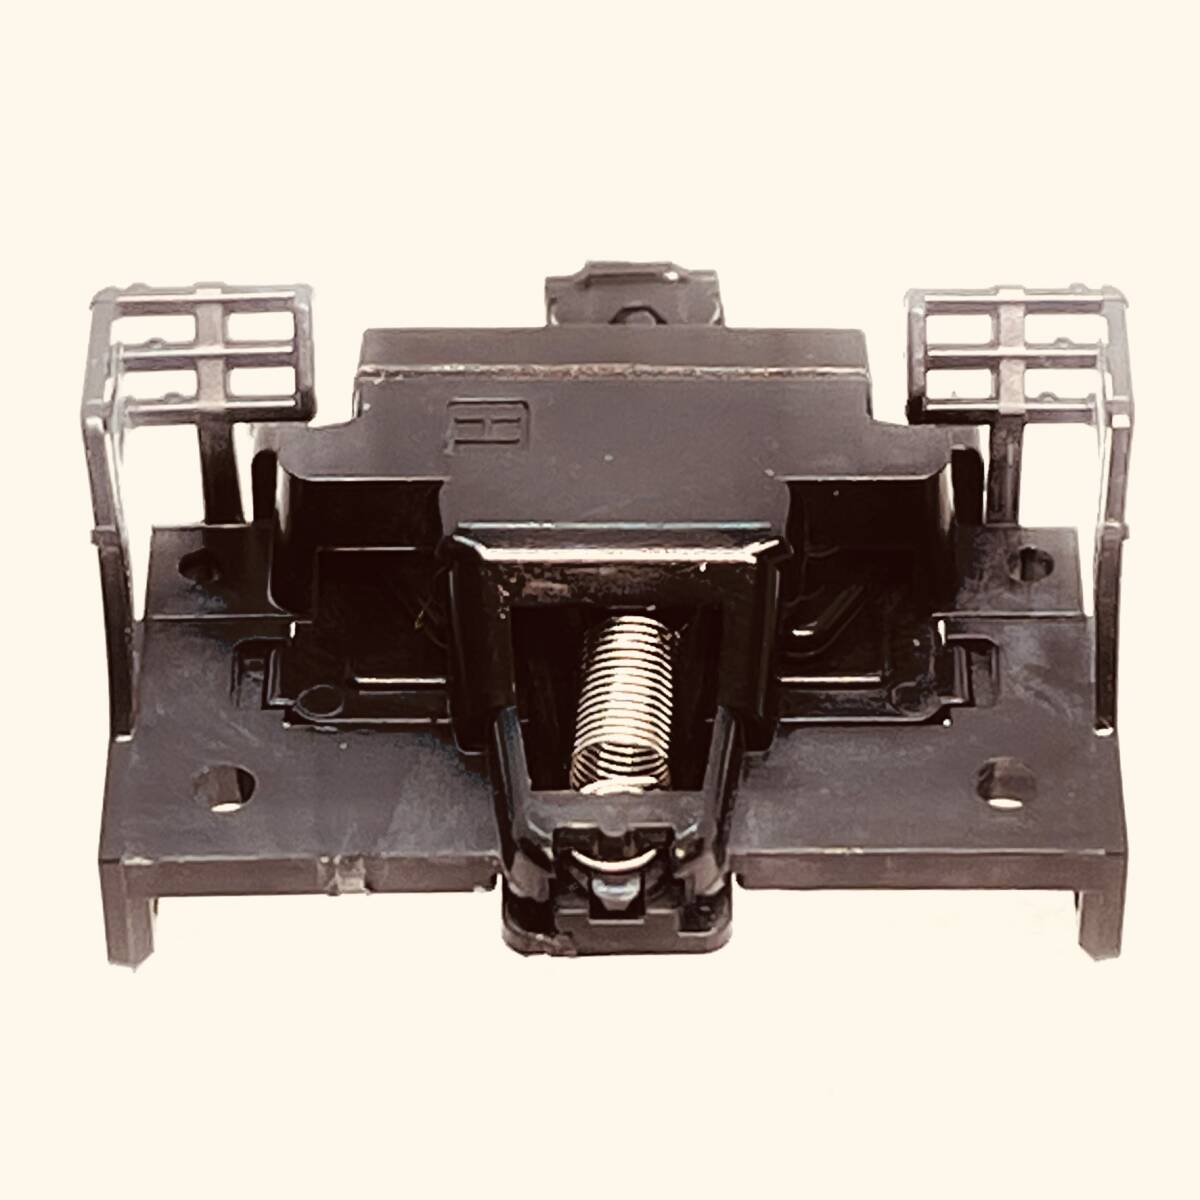 TOMIX piping attaching molasses ream shape TN coupler / black color 1 piece entering National Railways type train oriented 